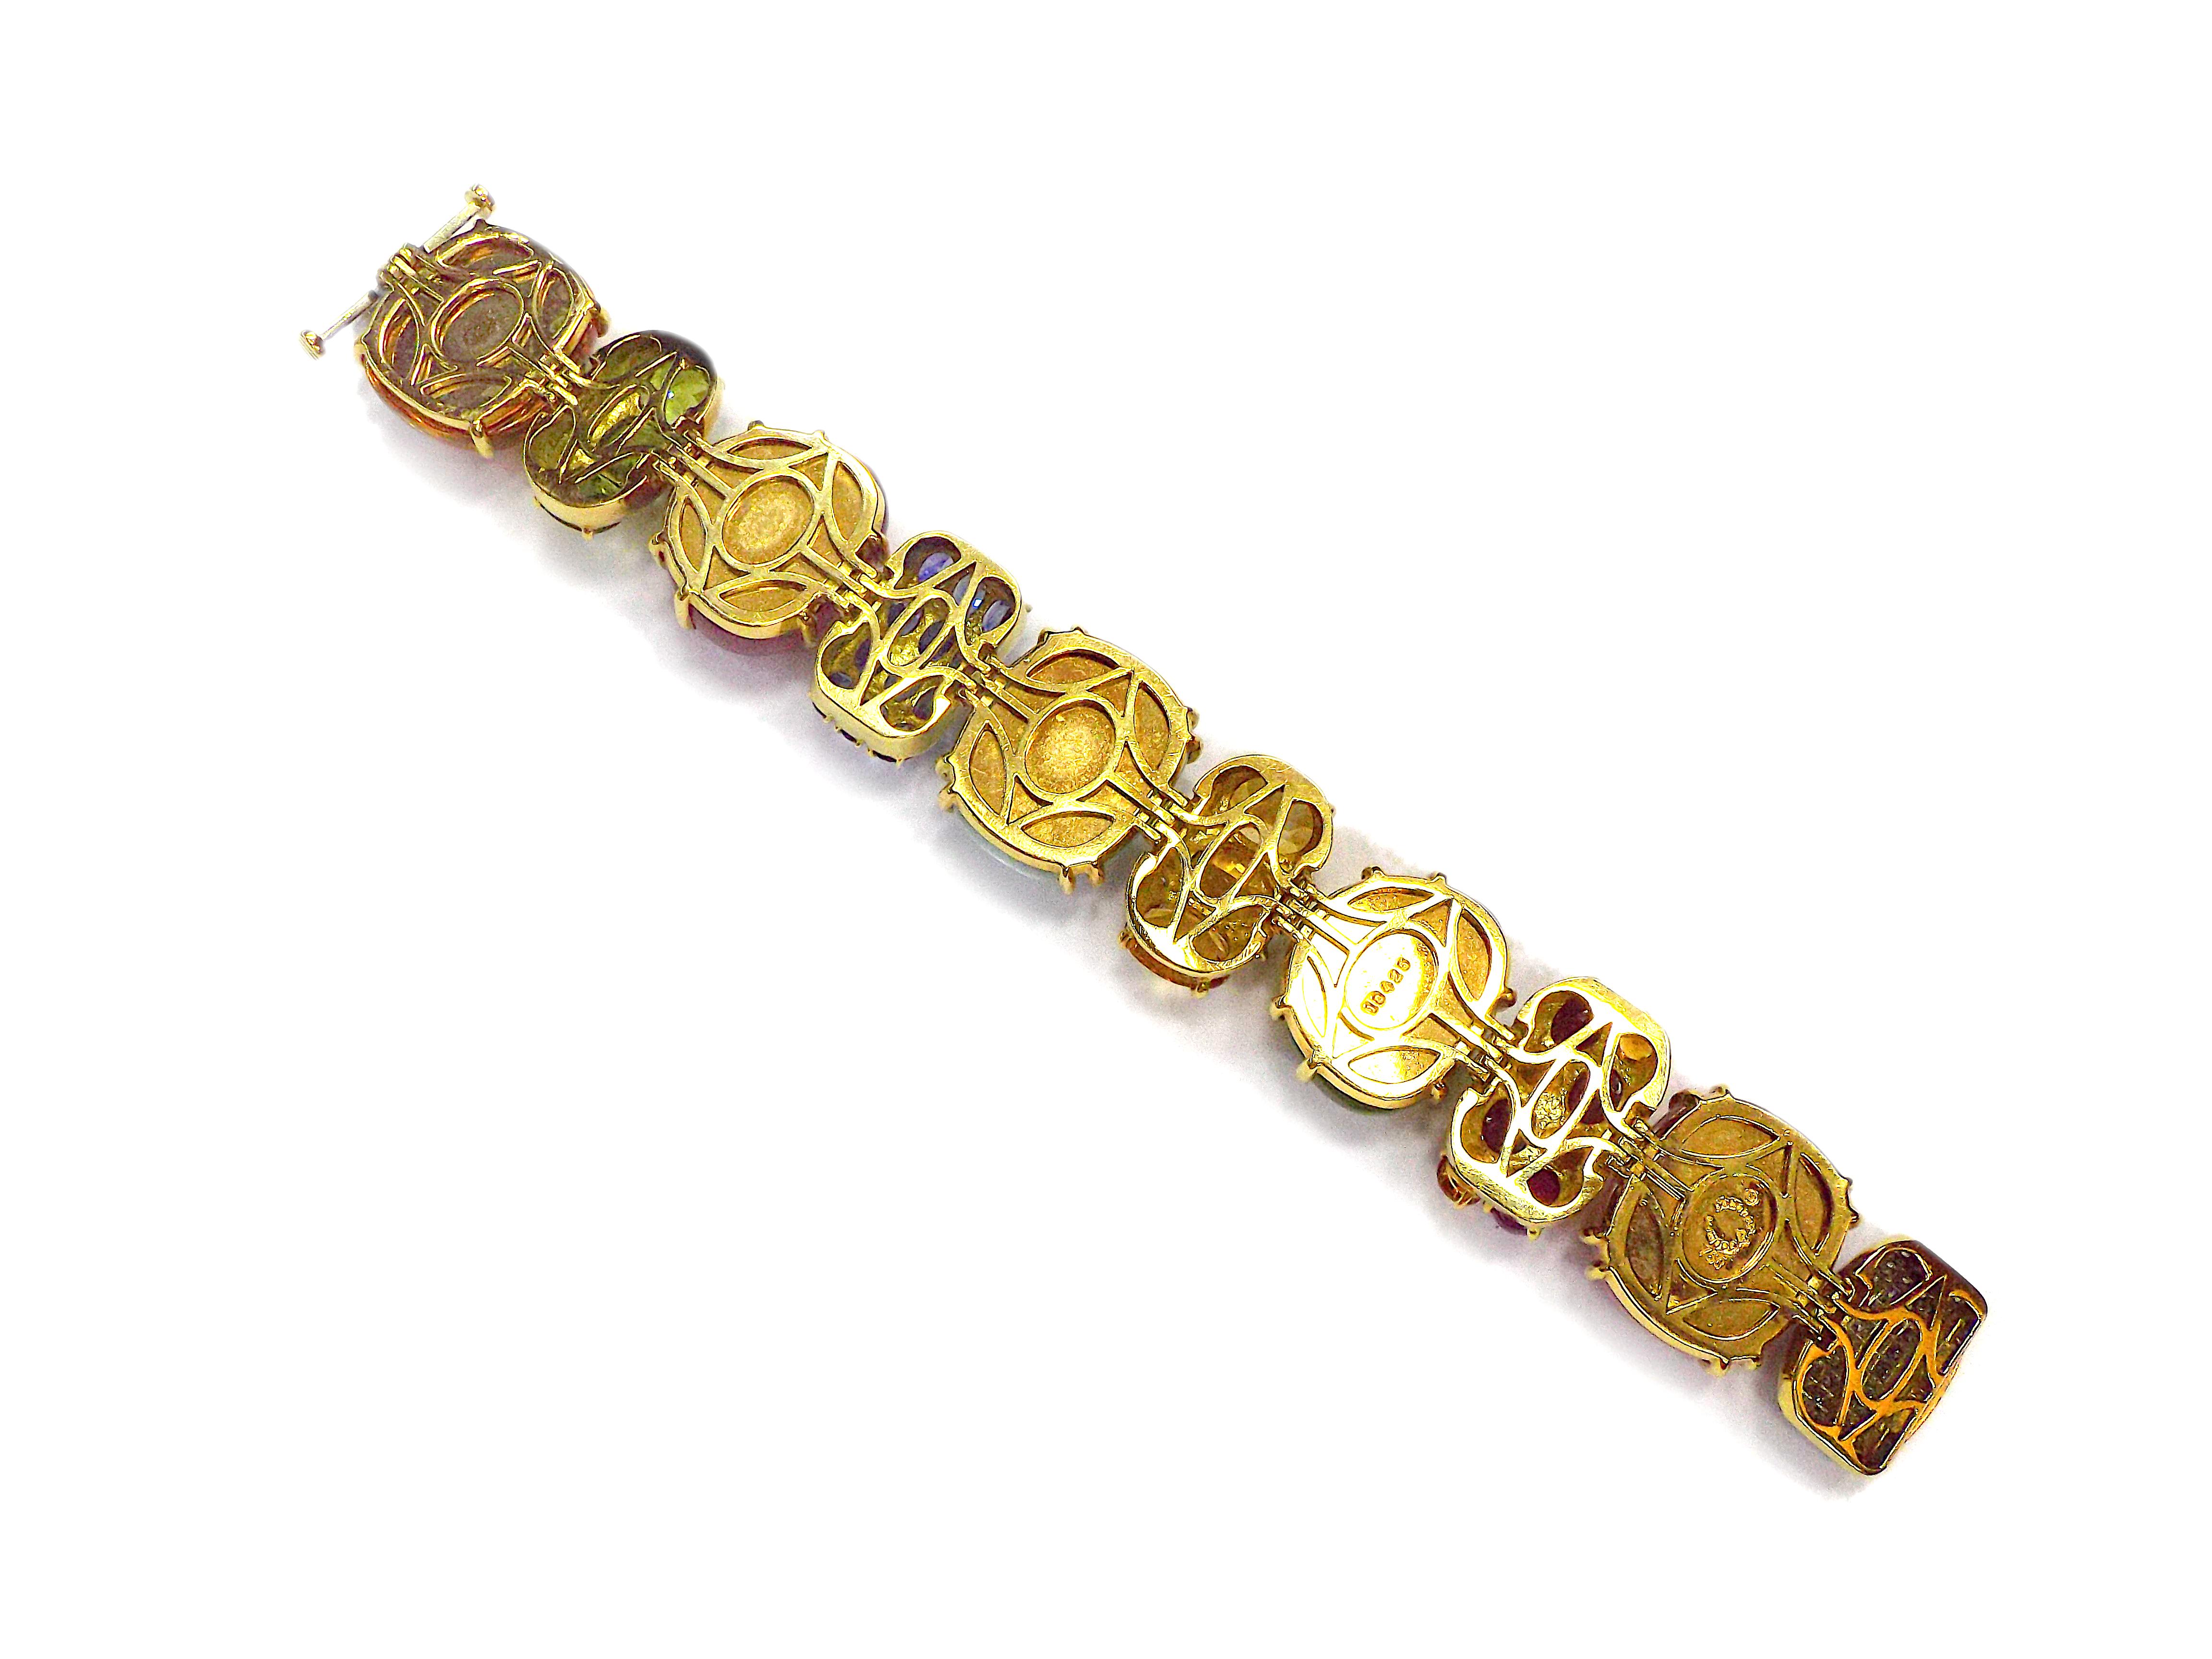 A fantastic multi gemstone bracelet by Seaman Schepps from Rio collection. Featuring sapphires, emeralds, rubies, peridots, citrines, rose quartz, tourmalines, topaz, aquamarines and diamond stones, mounted in 18K yellow gold. The length is 7.25